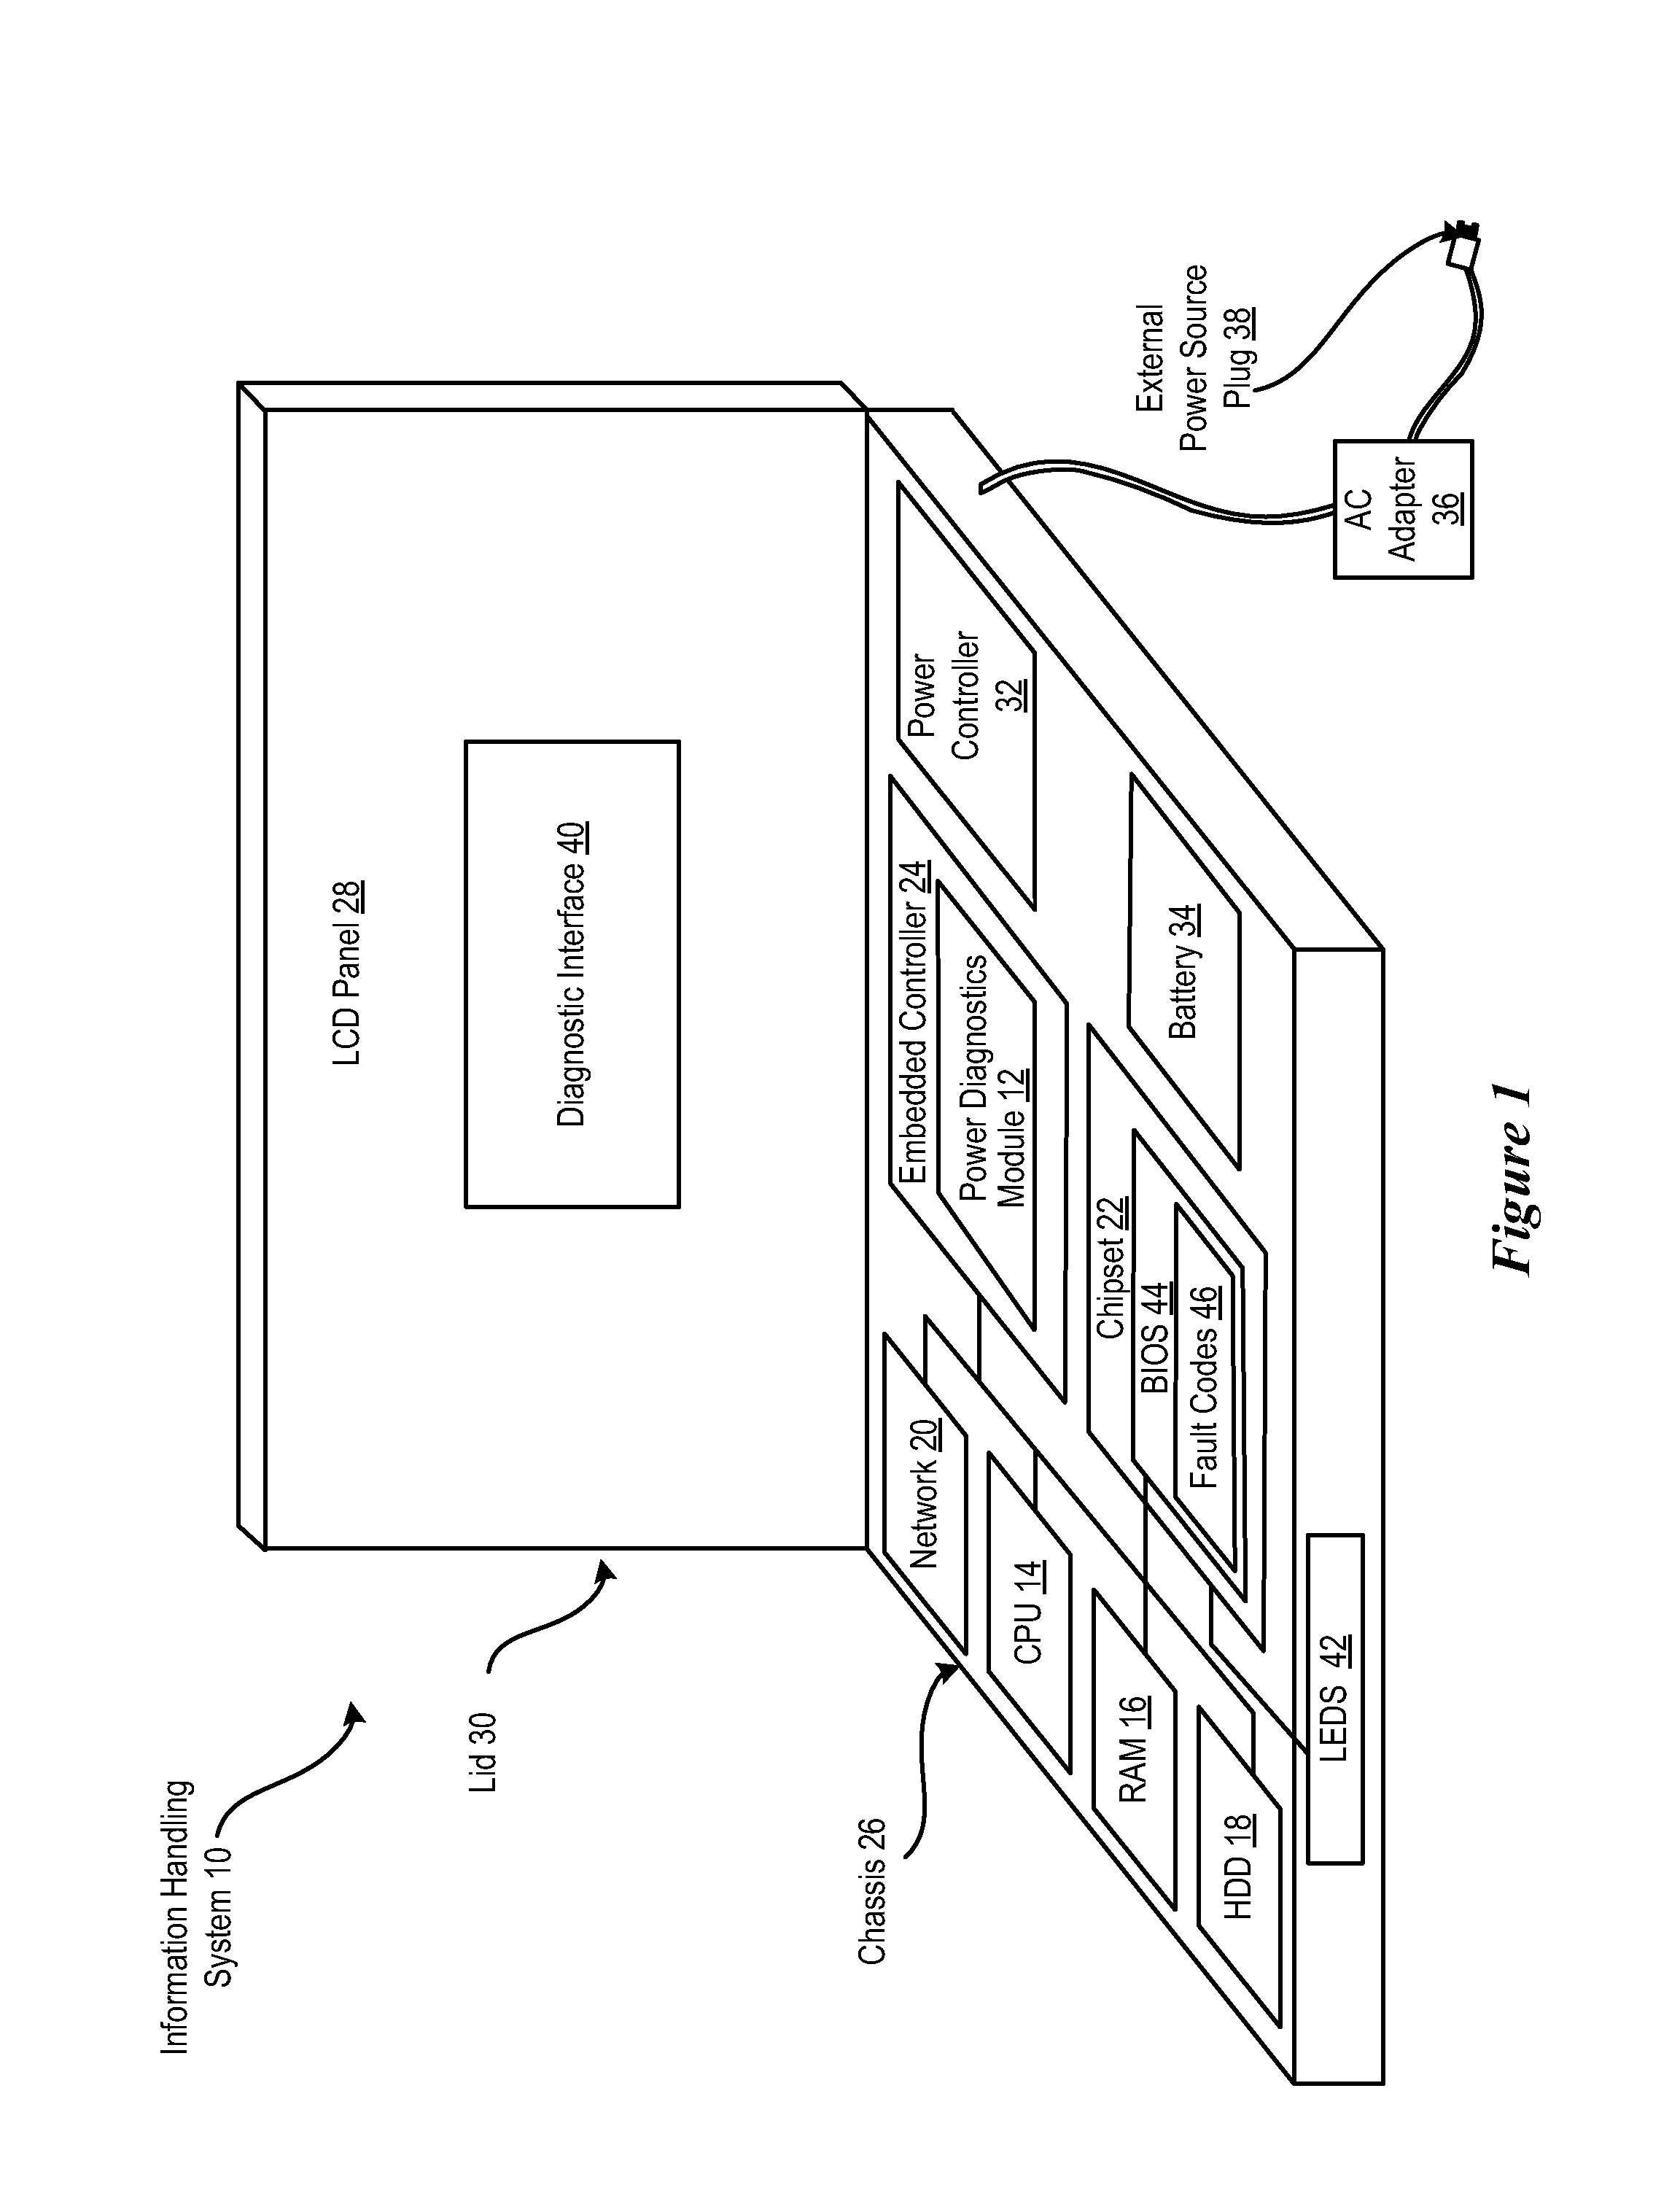 System and method for reserving information handling system battery charge to perform diagnostics